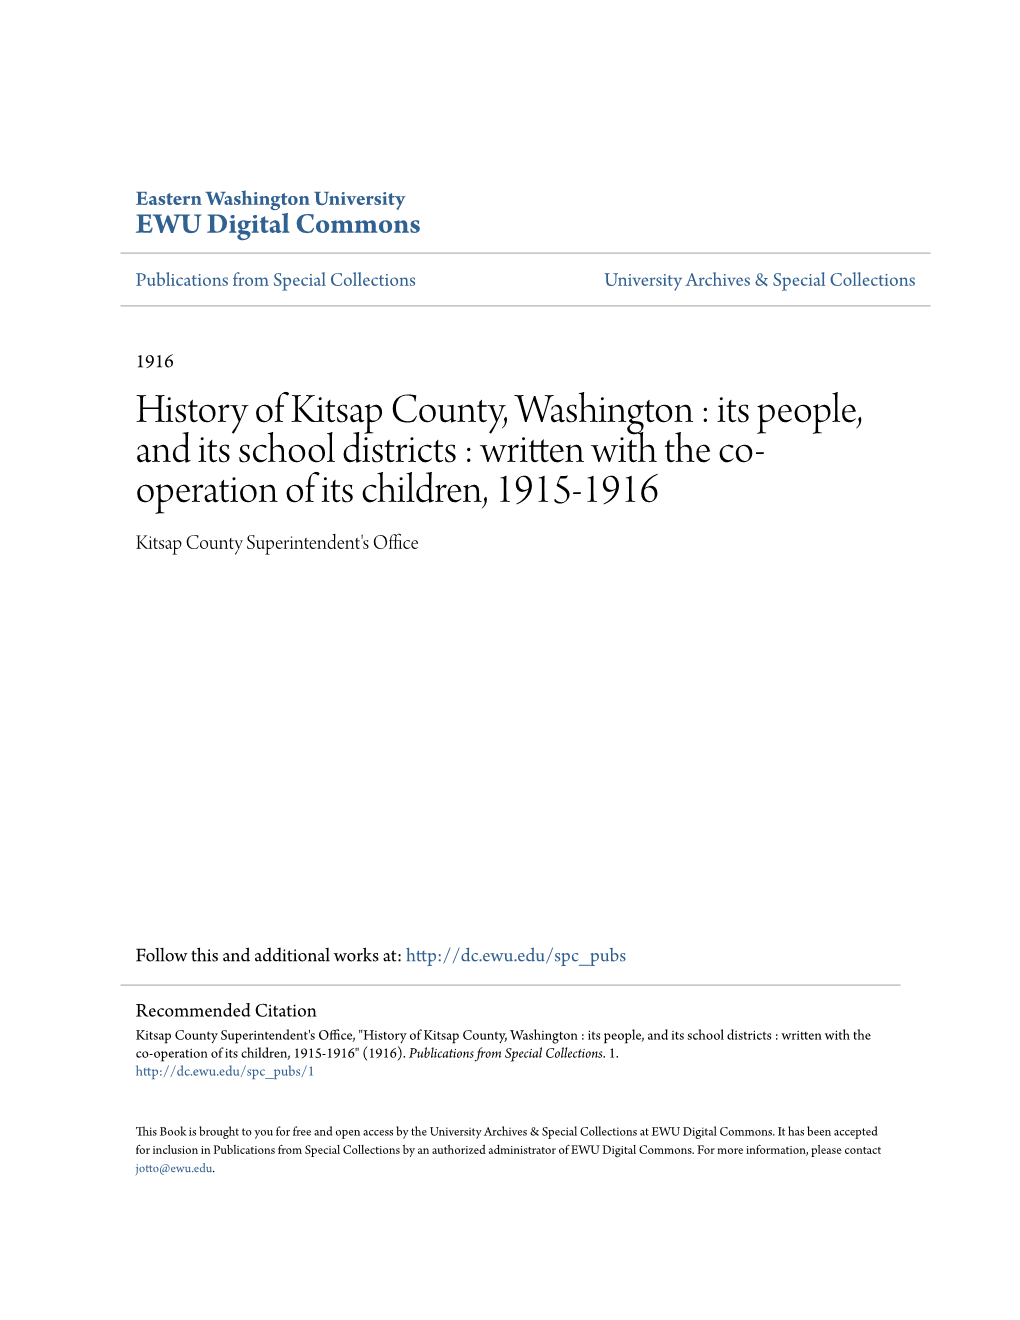 History of Kitsap County, Washington : Its People, and Its School Districts